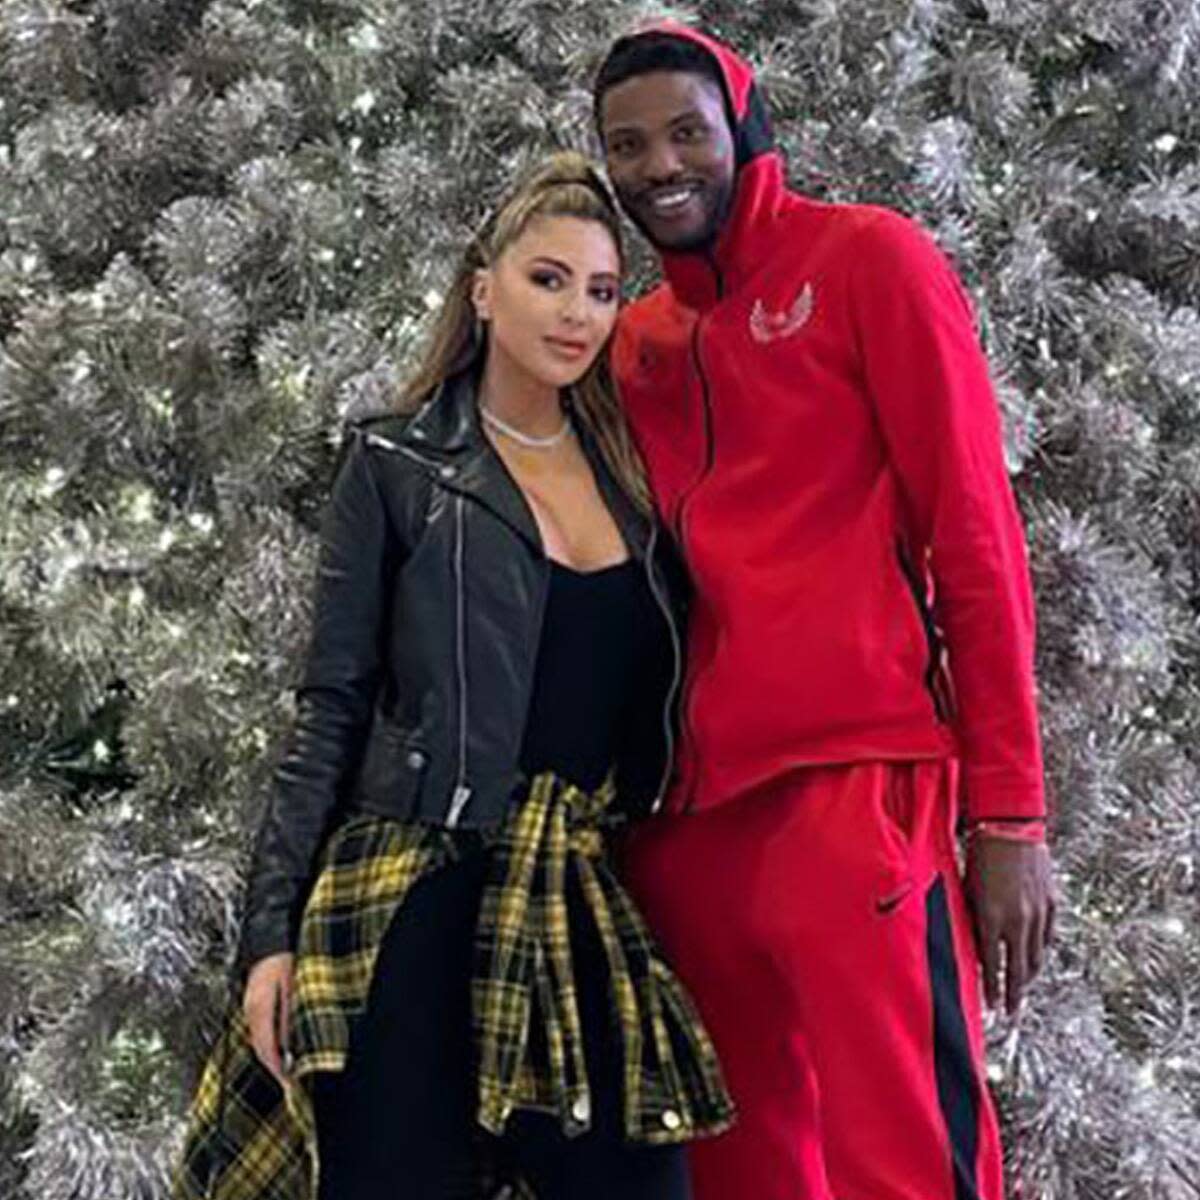 Larsa Pippen claims that Malik Beasley was separated from Montana Yao when she met him